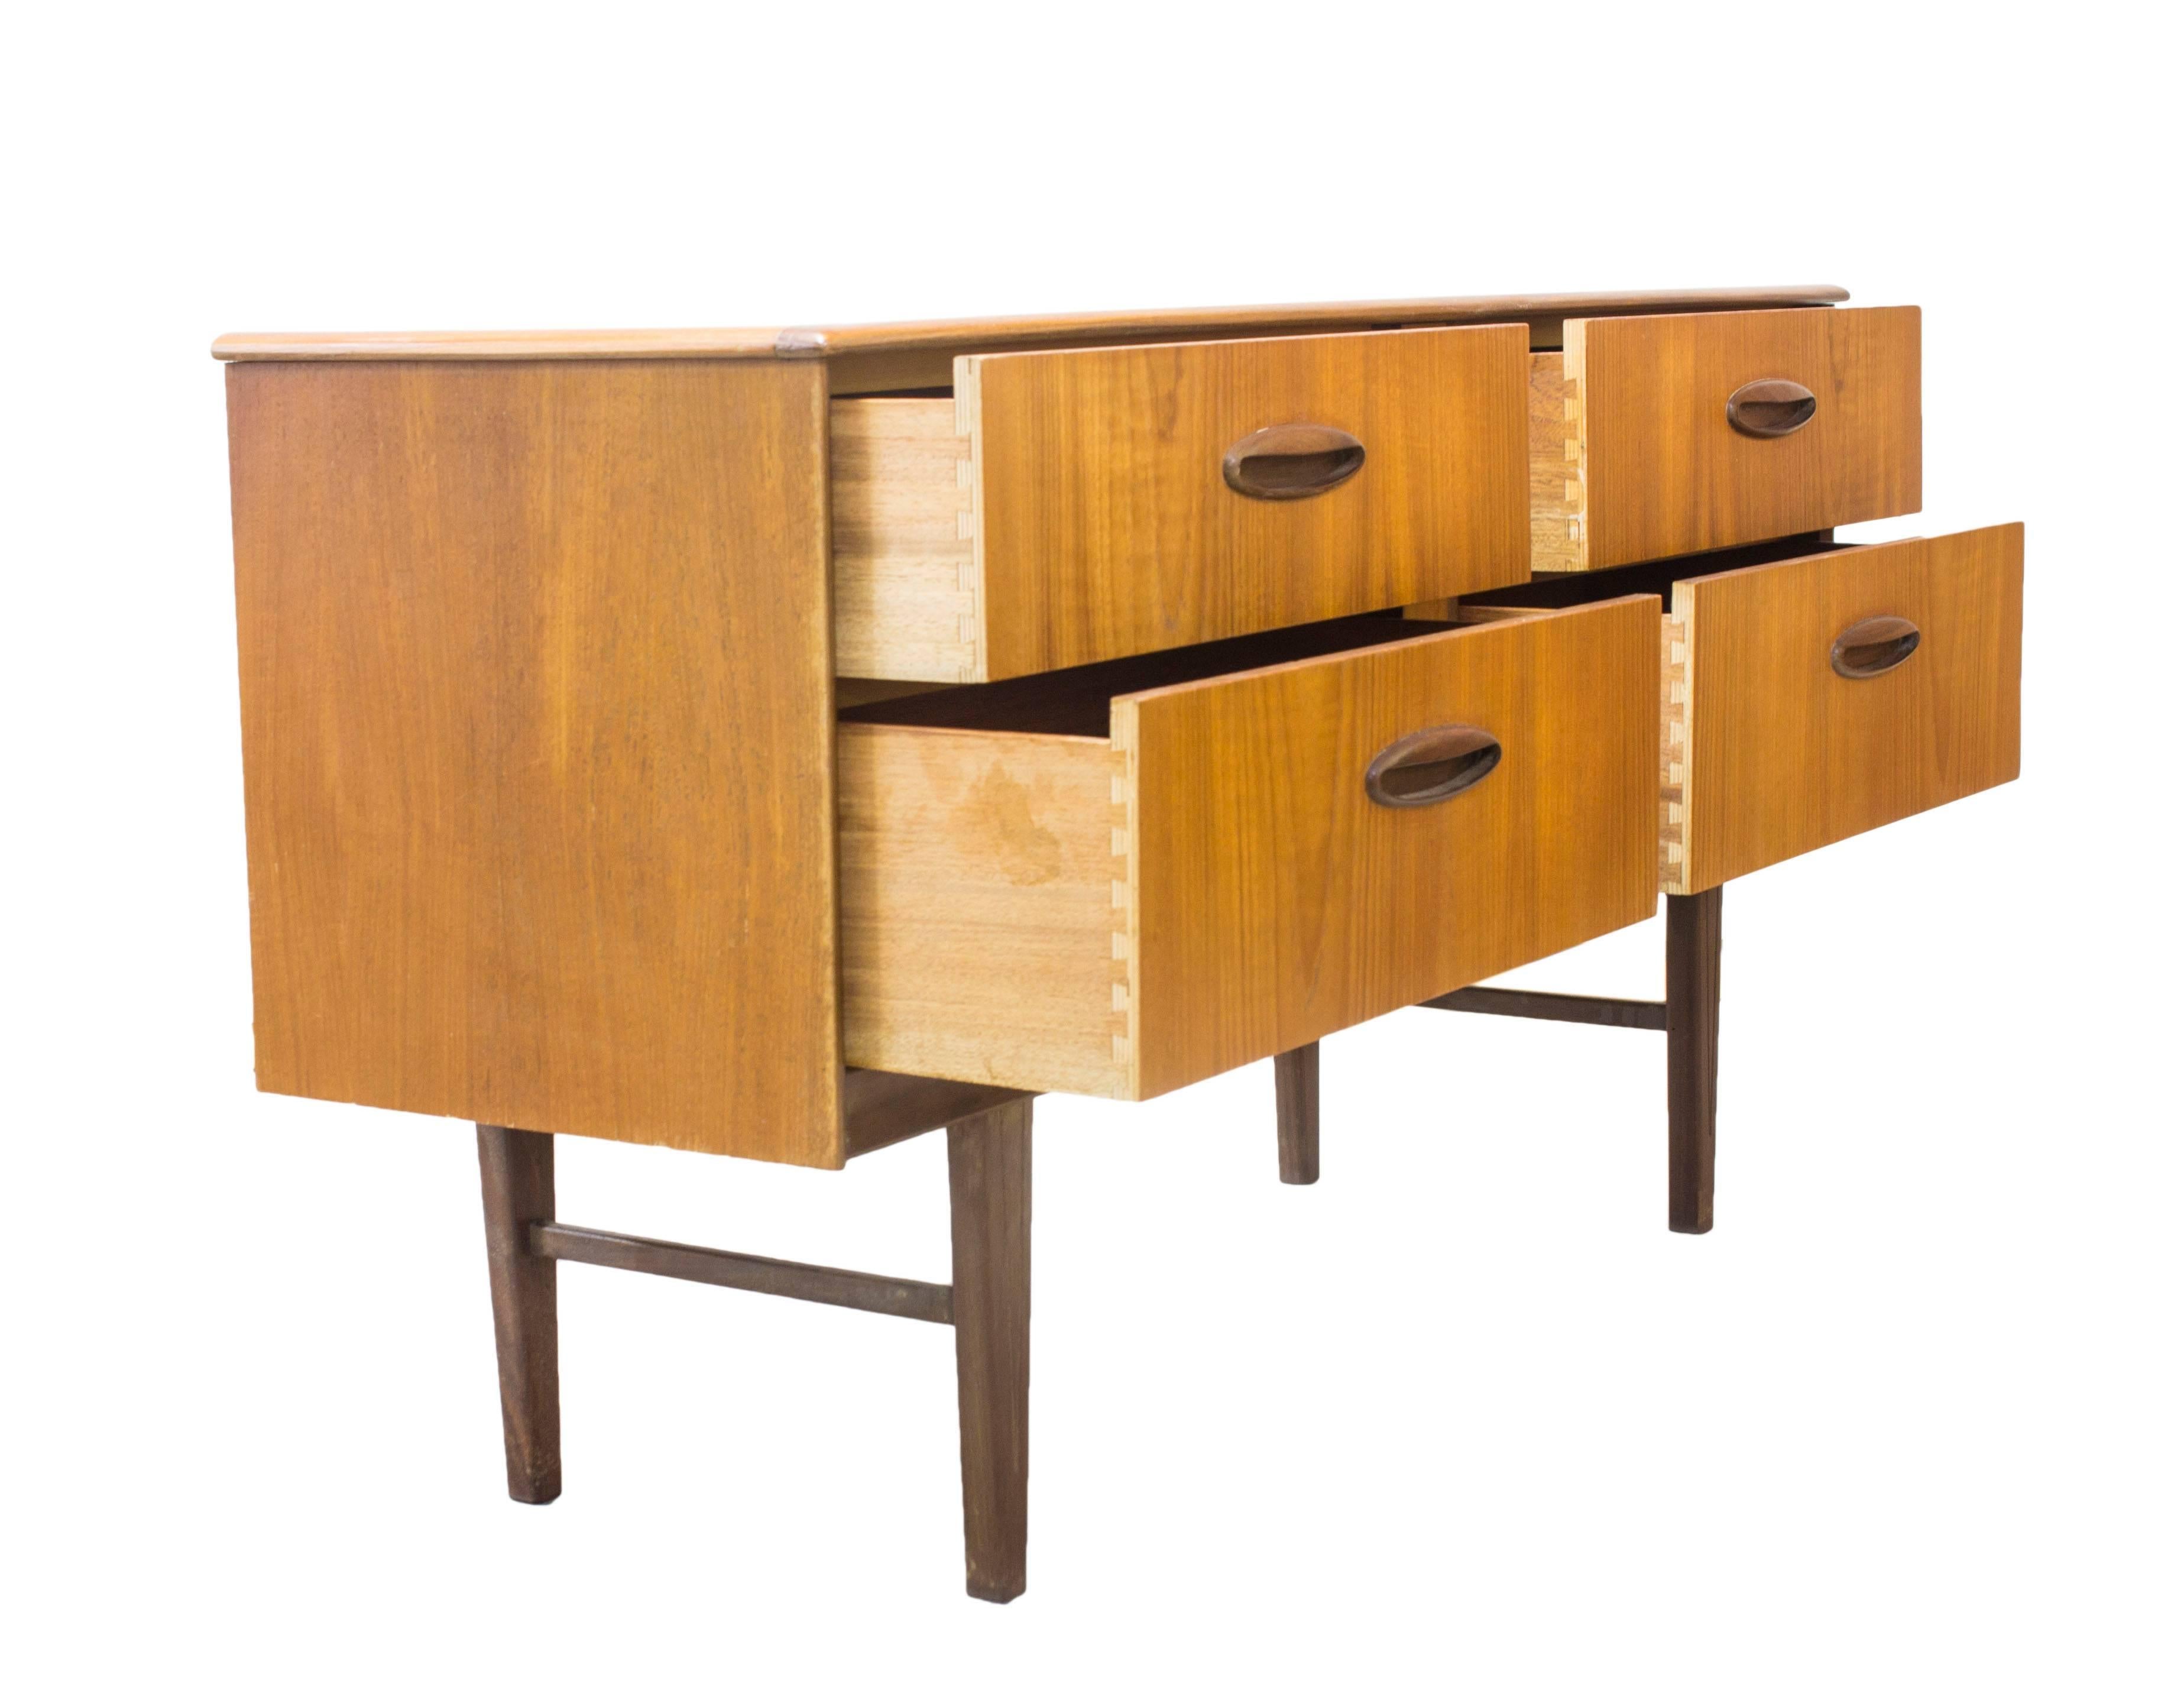 20th Century Danish Style Compact Sideboard Storage Unit For Sale